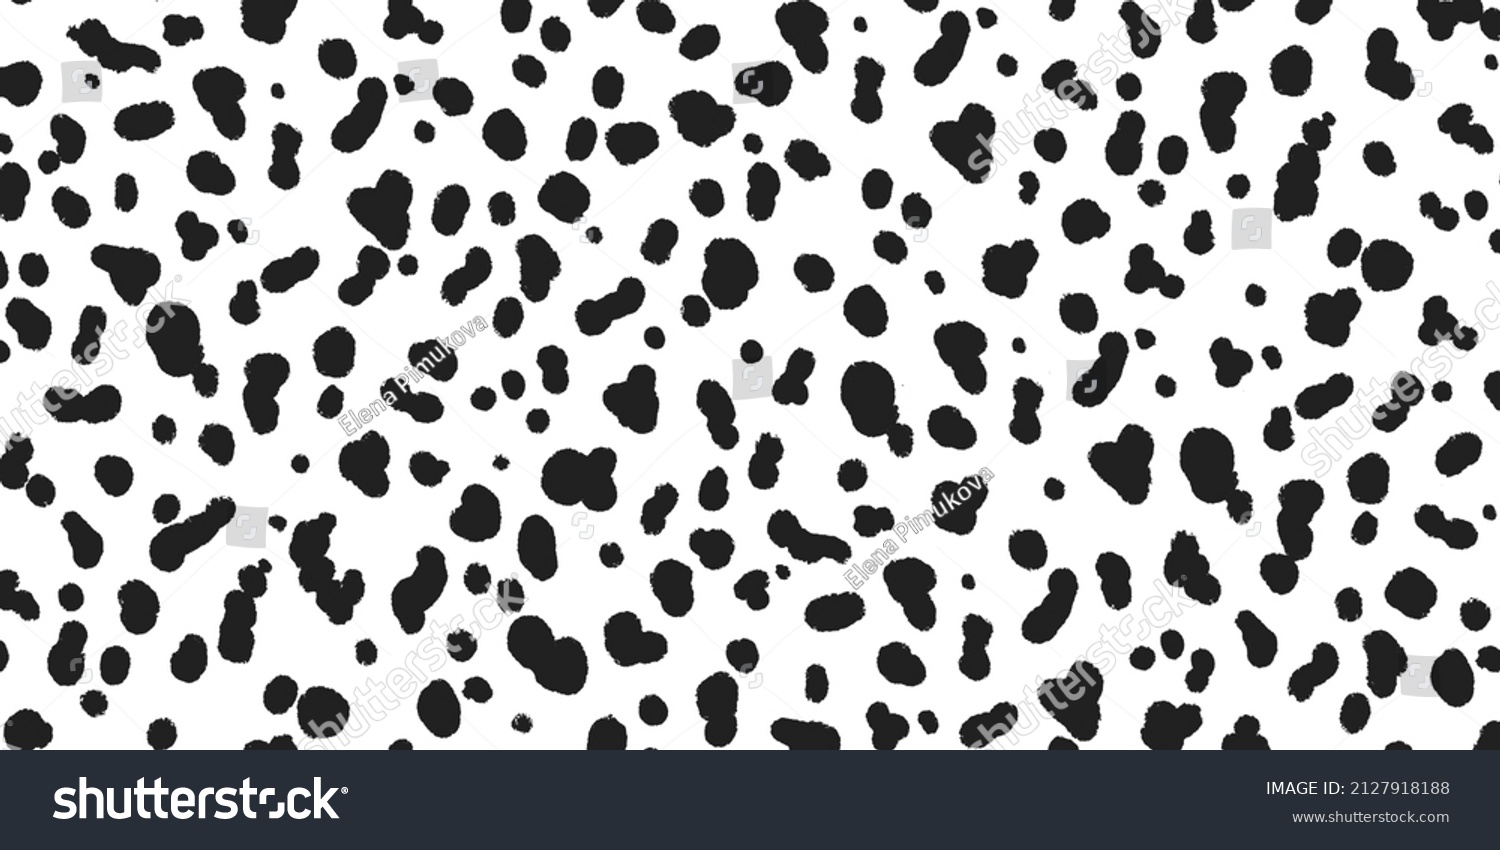 SVG of Dalmatian coloration banner. Black abstract organic blobs on white background. Black dalmatian spots on a white backdrop. Animal print. Vector hand drawn illustration. svg